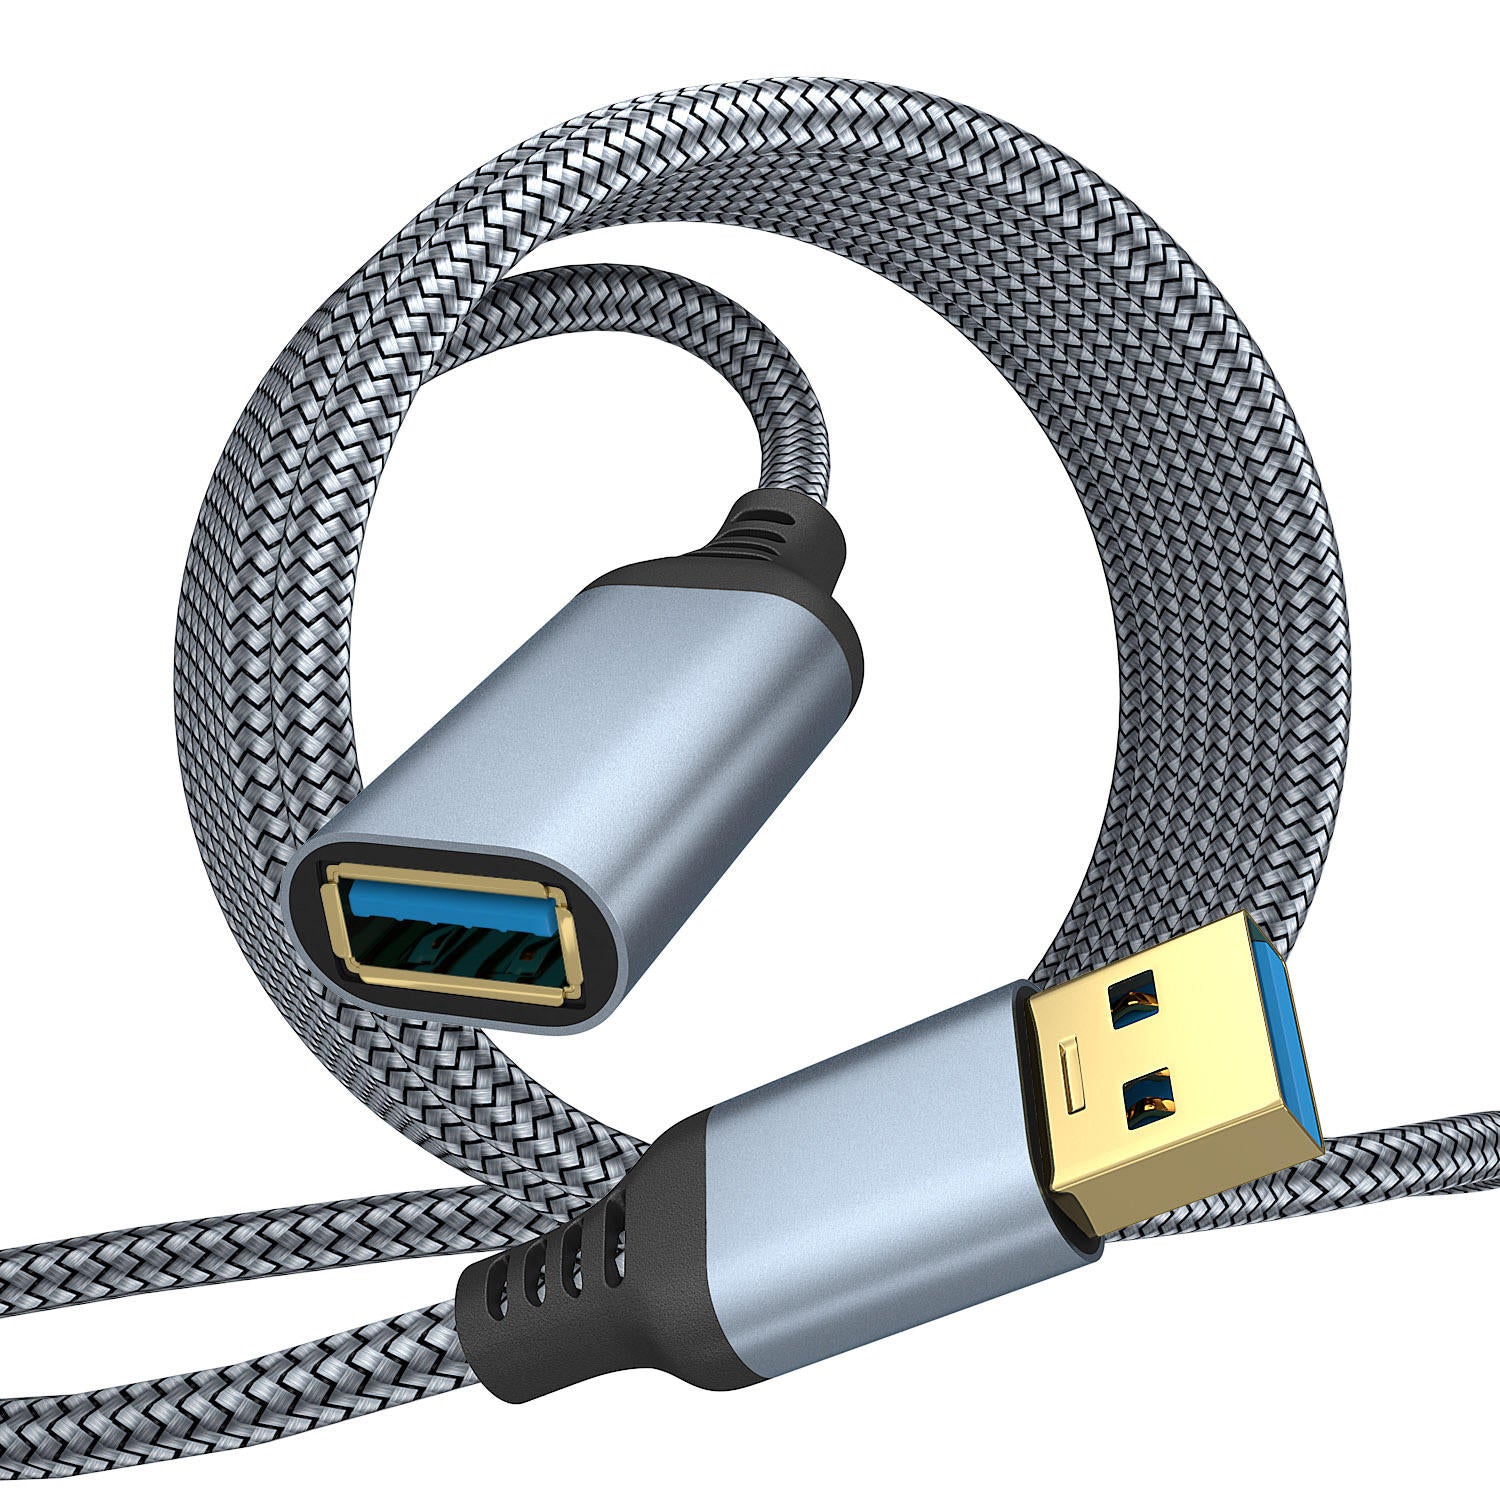 1m USB 3.0 Male to Female Data Cable 5Gbps Data Transmission Nylon Braided Extension Cord - Grey